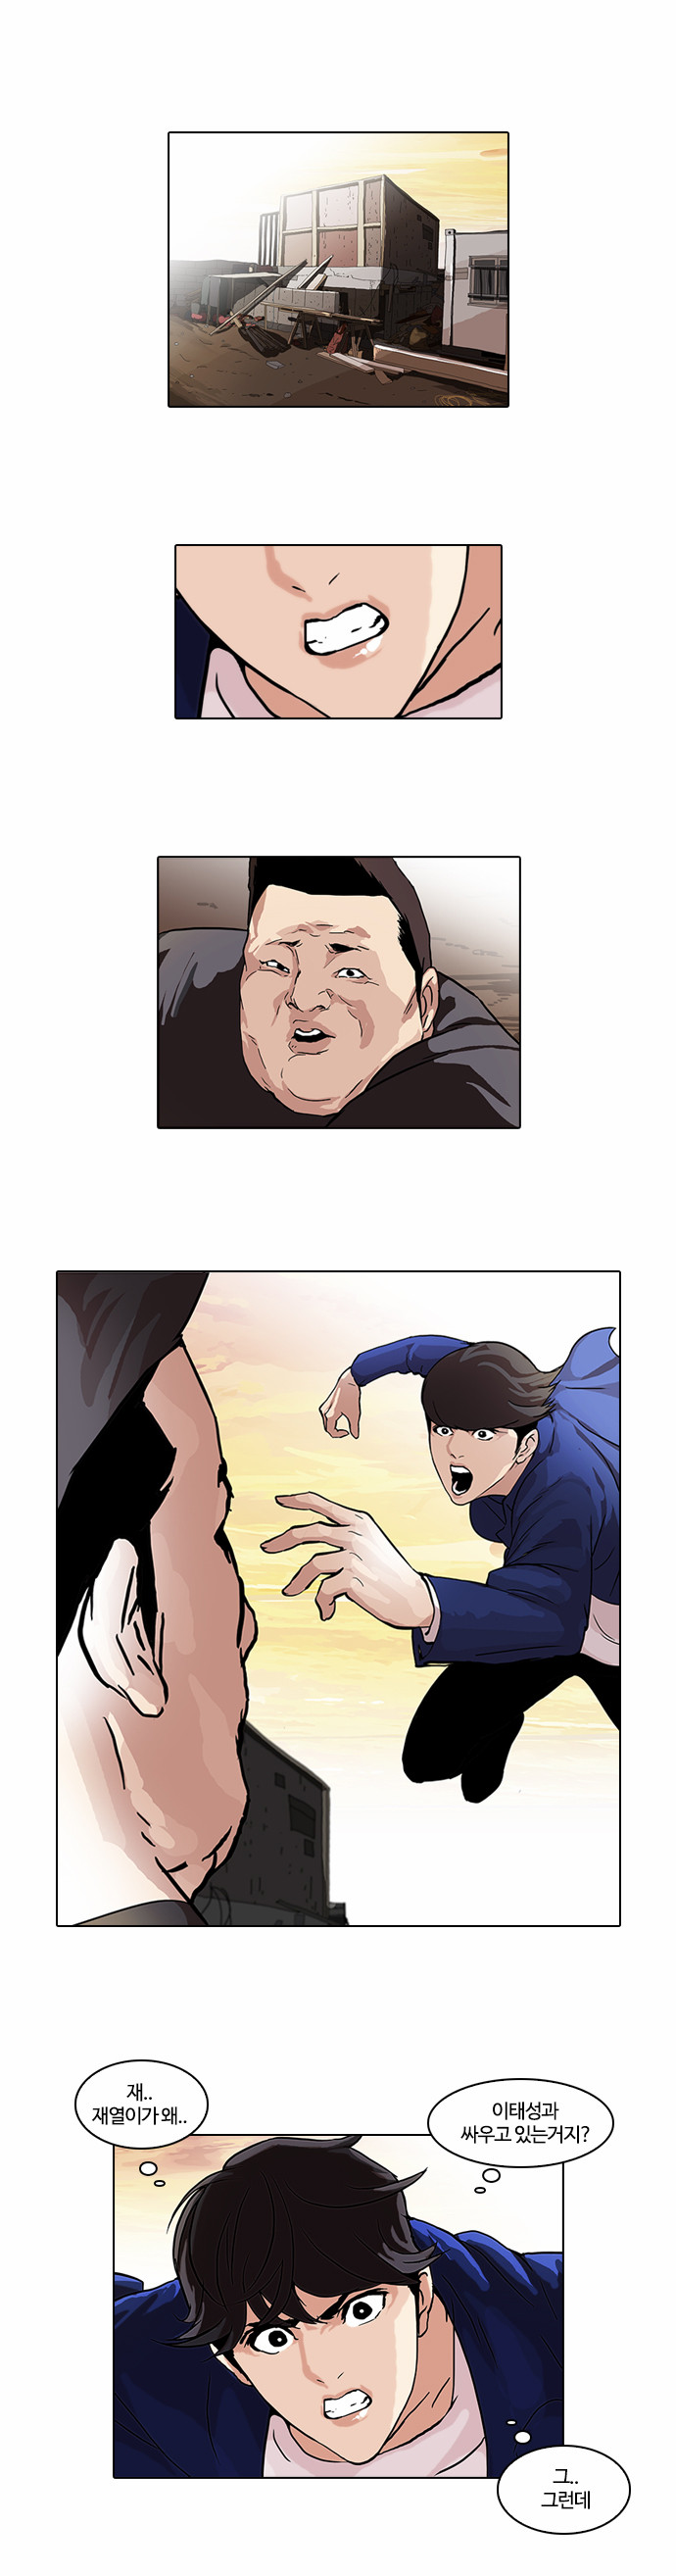 Lookism - Chapter 50 - Page 1